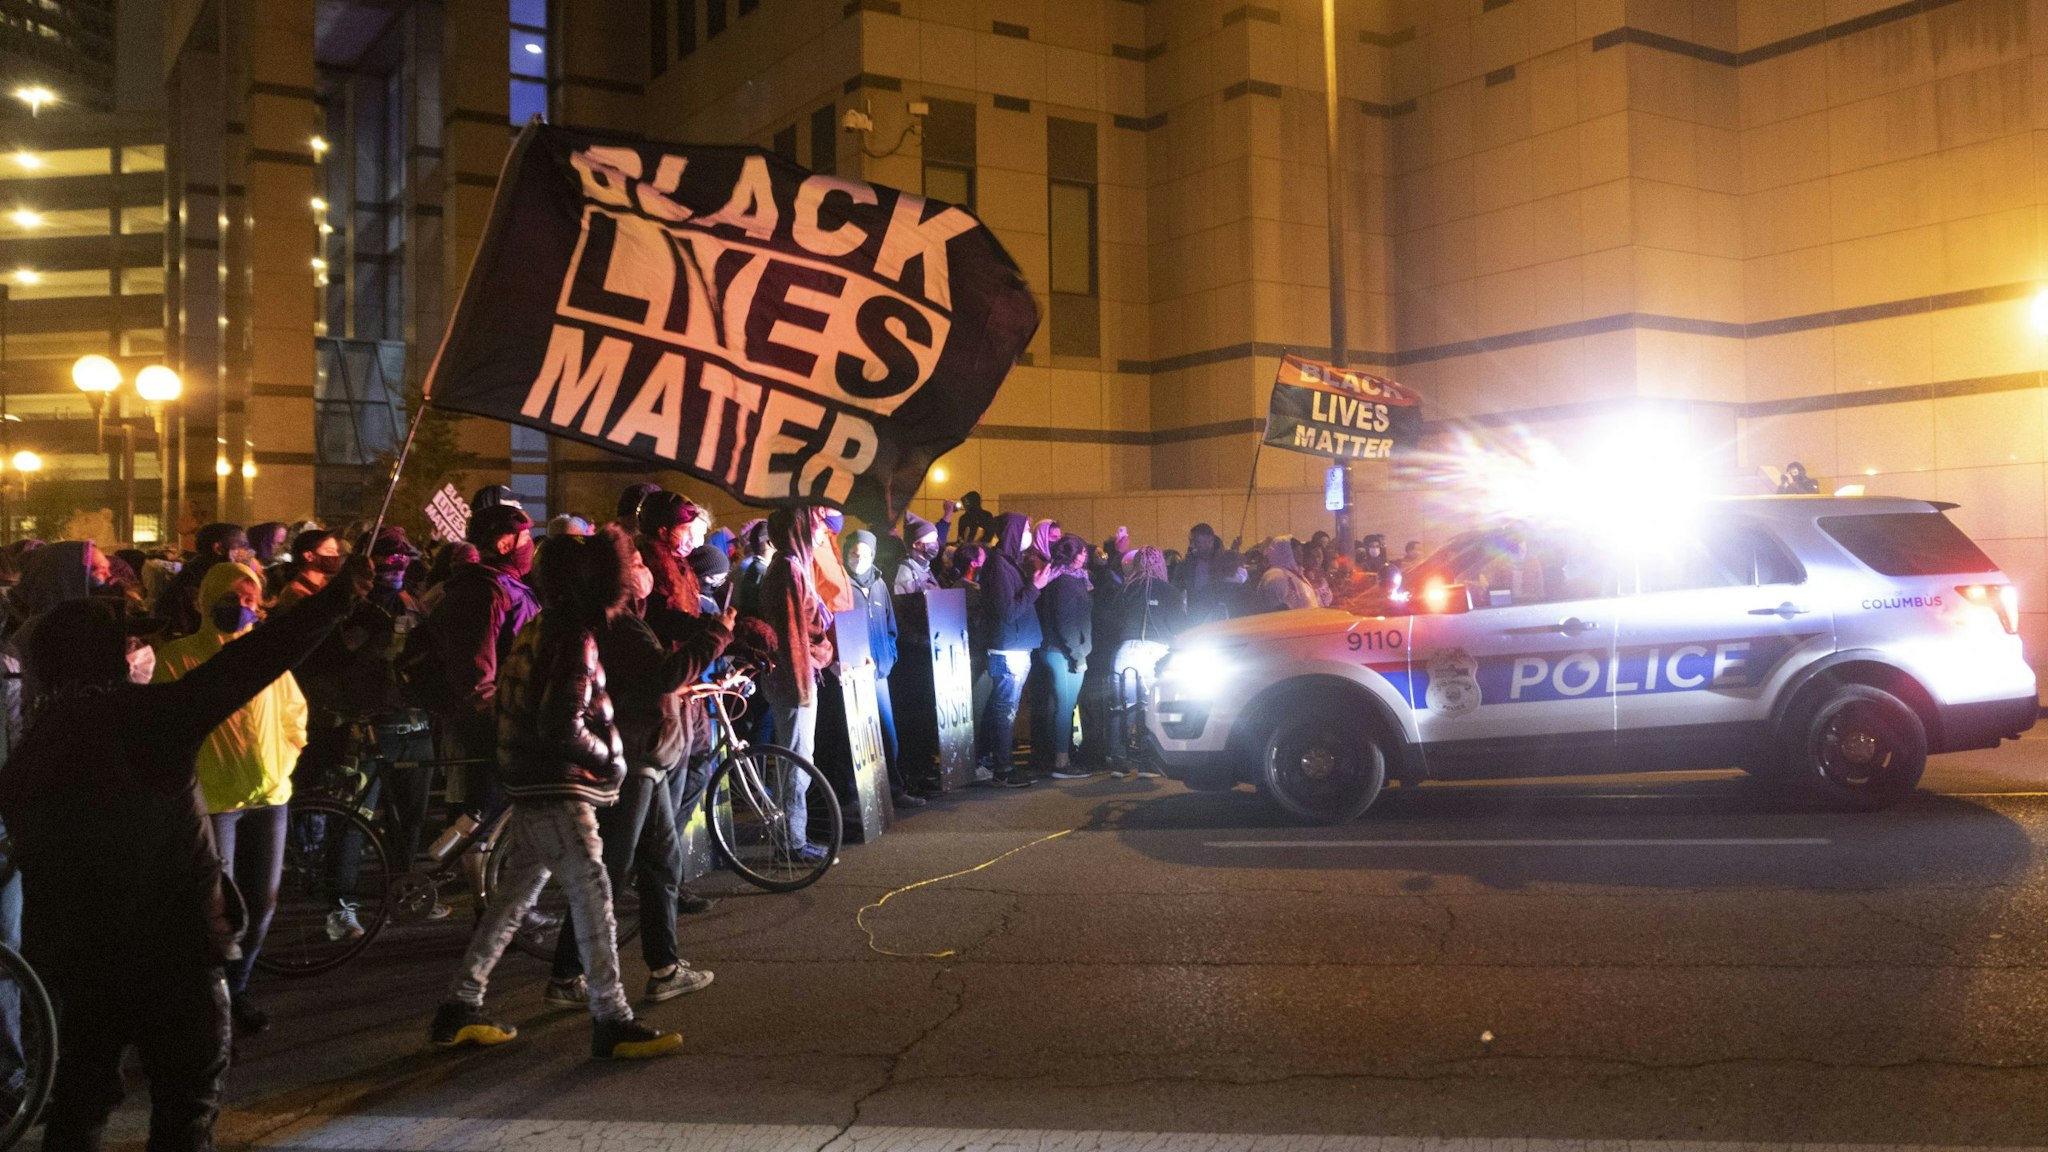 COLUMBUS, OH - APRIL 20: Black Lives Matter activists confront Columbus Police outside of Columbus Police headquarters during a protest in reaction to the shooting of Makiyah Bryant on April 20, 2021 in Columbus, Ohio. Columbus Police Shot and killed Makiyah Bryant, 16 years old, on April 20, 2021 sparking outrage from the community.